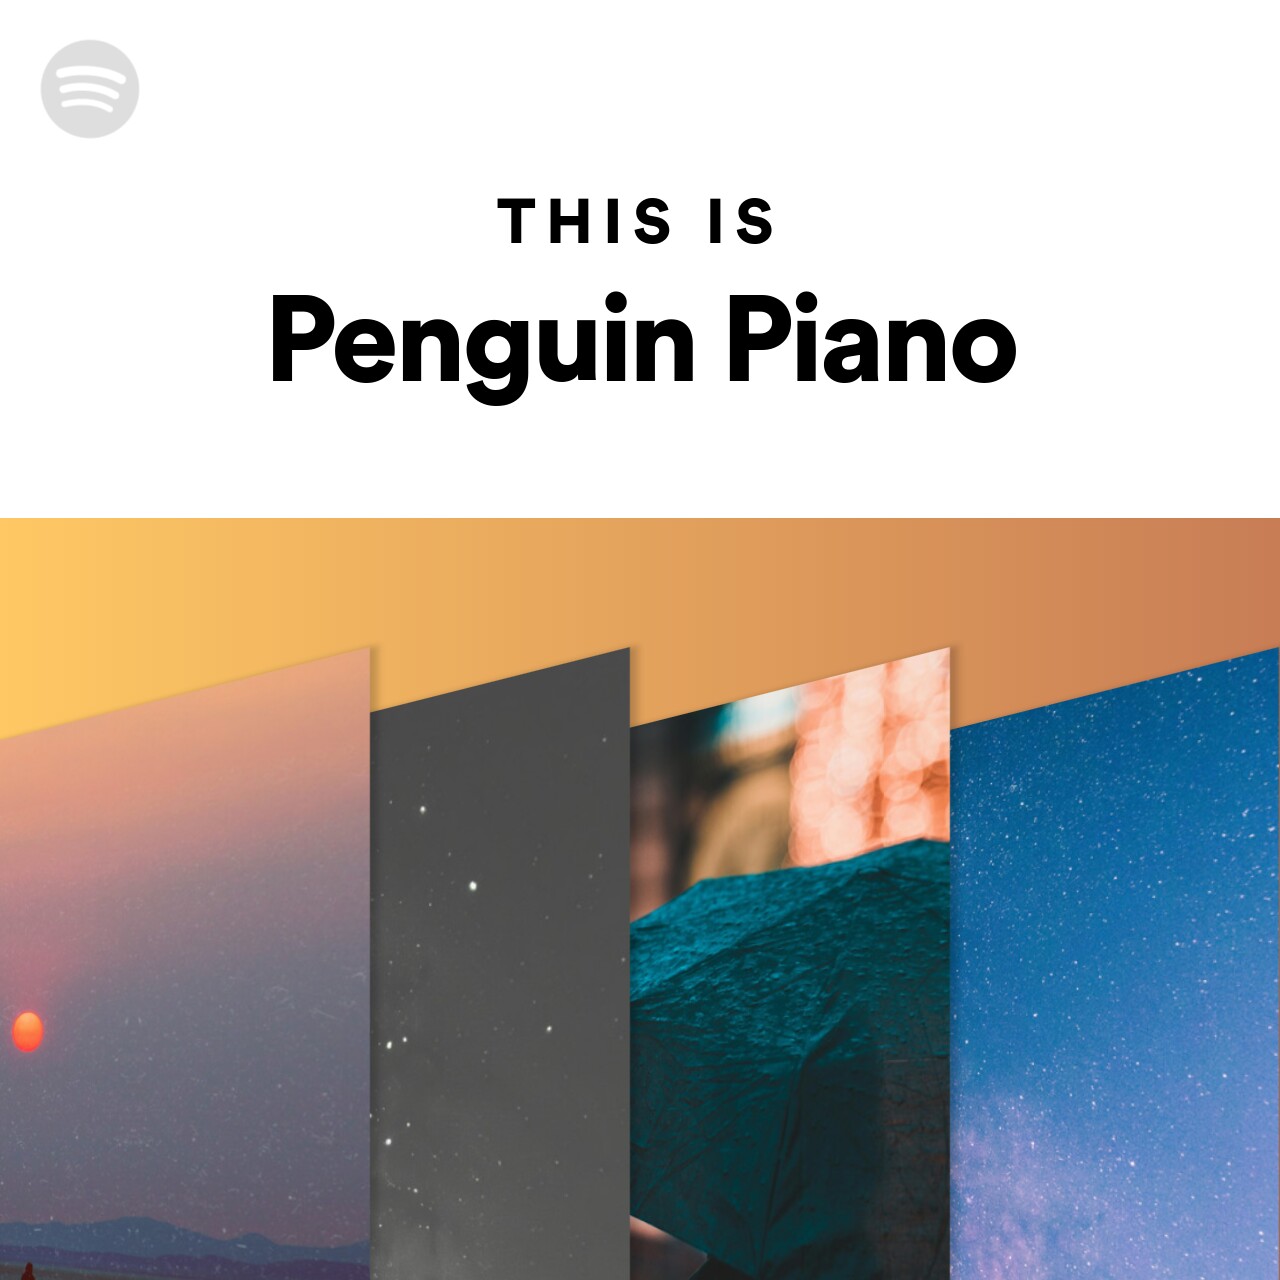 This Is Penguin Piano